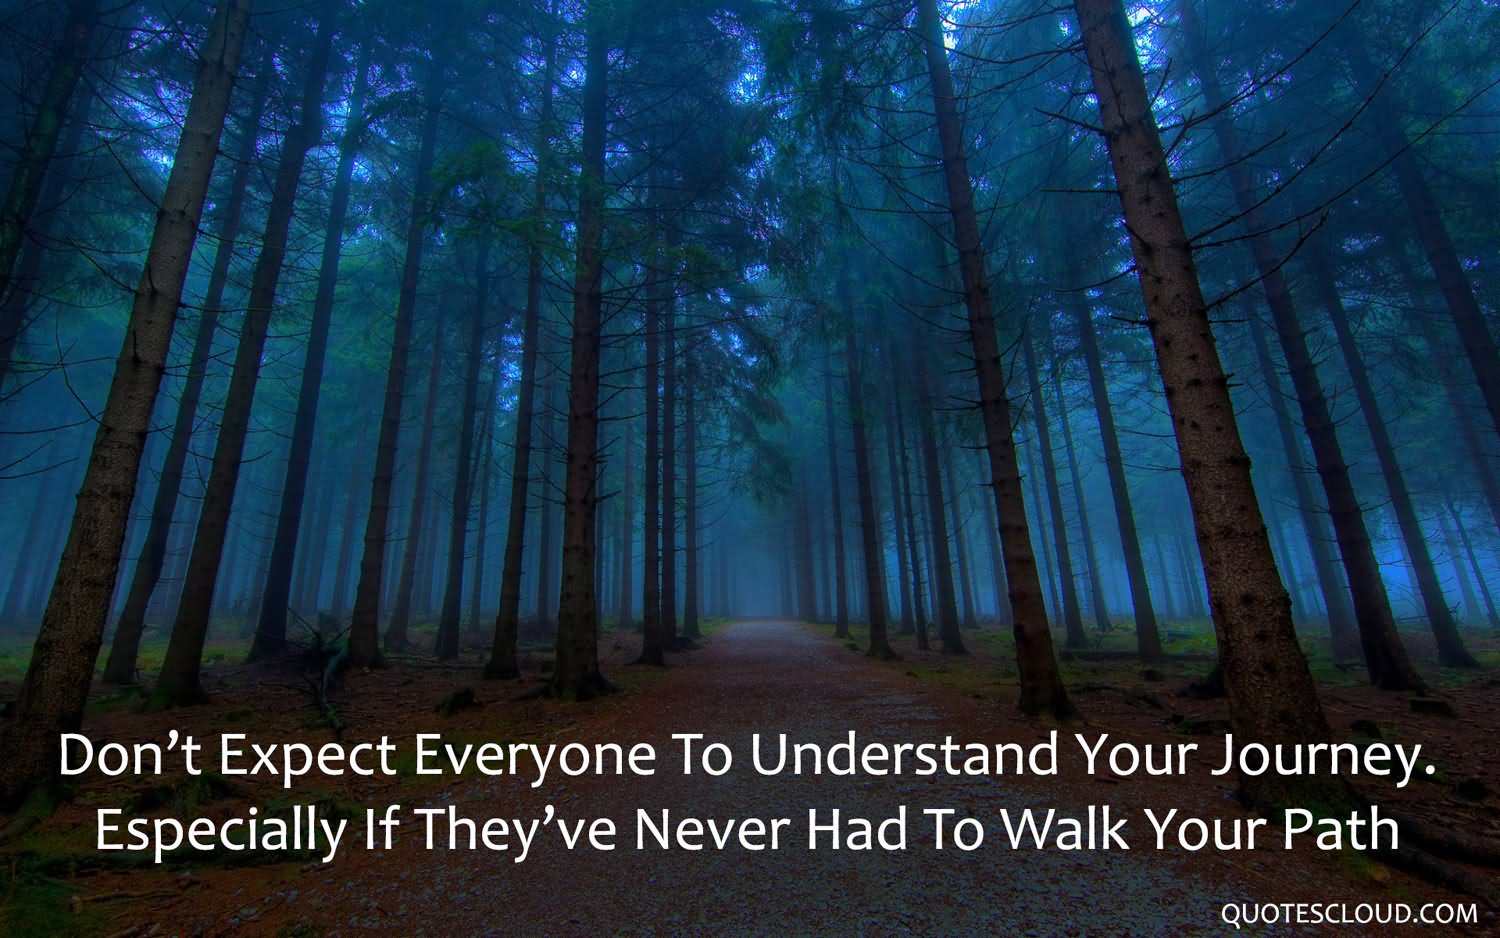 Don’t expect everyone to understand your journey, especially if they have never had to walk your path.